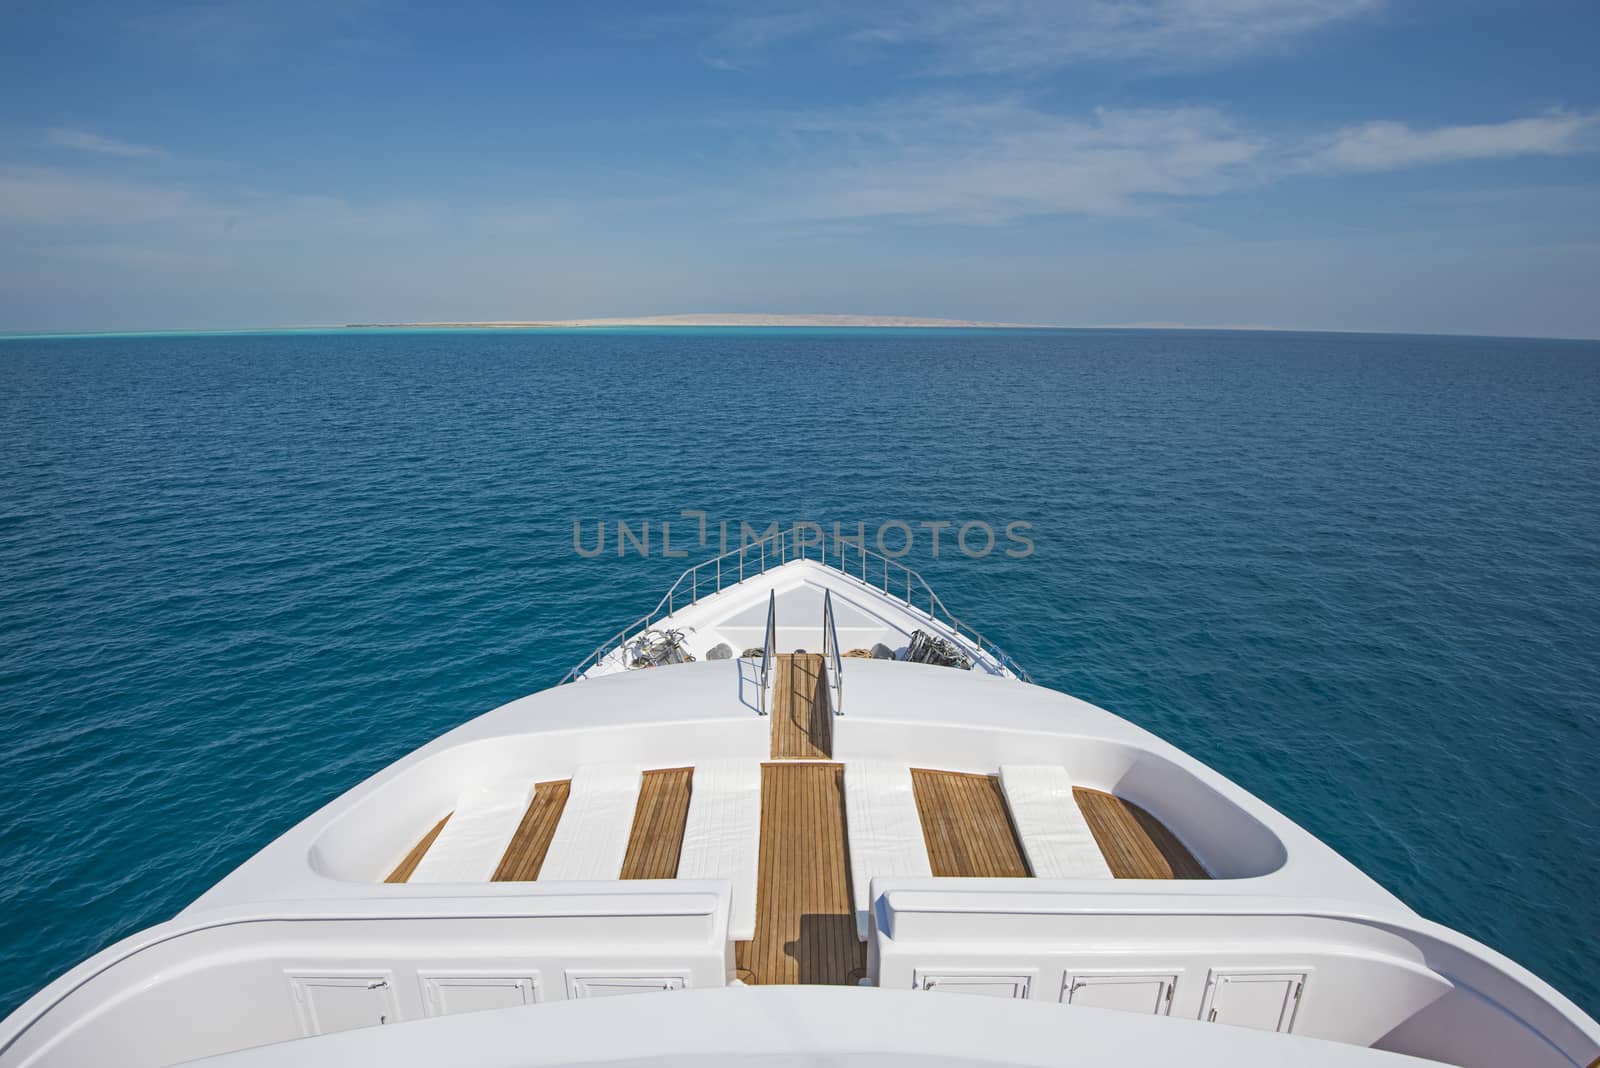 View over the bow over a large luxury motor yacht by paulvinten